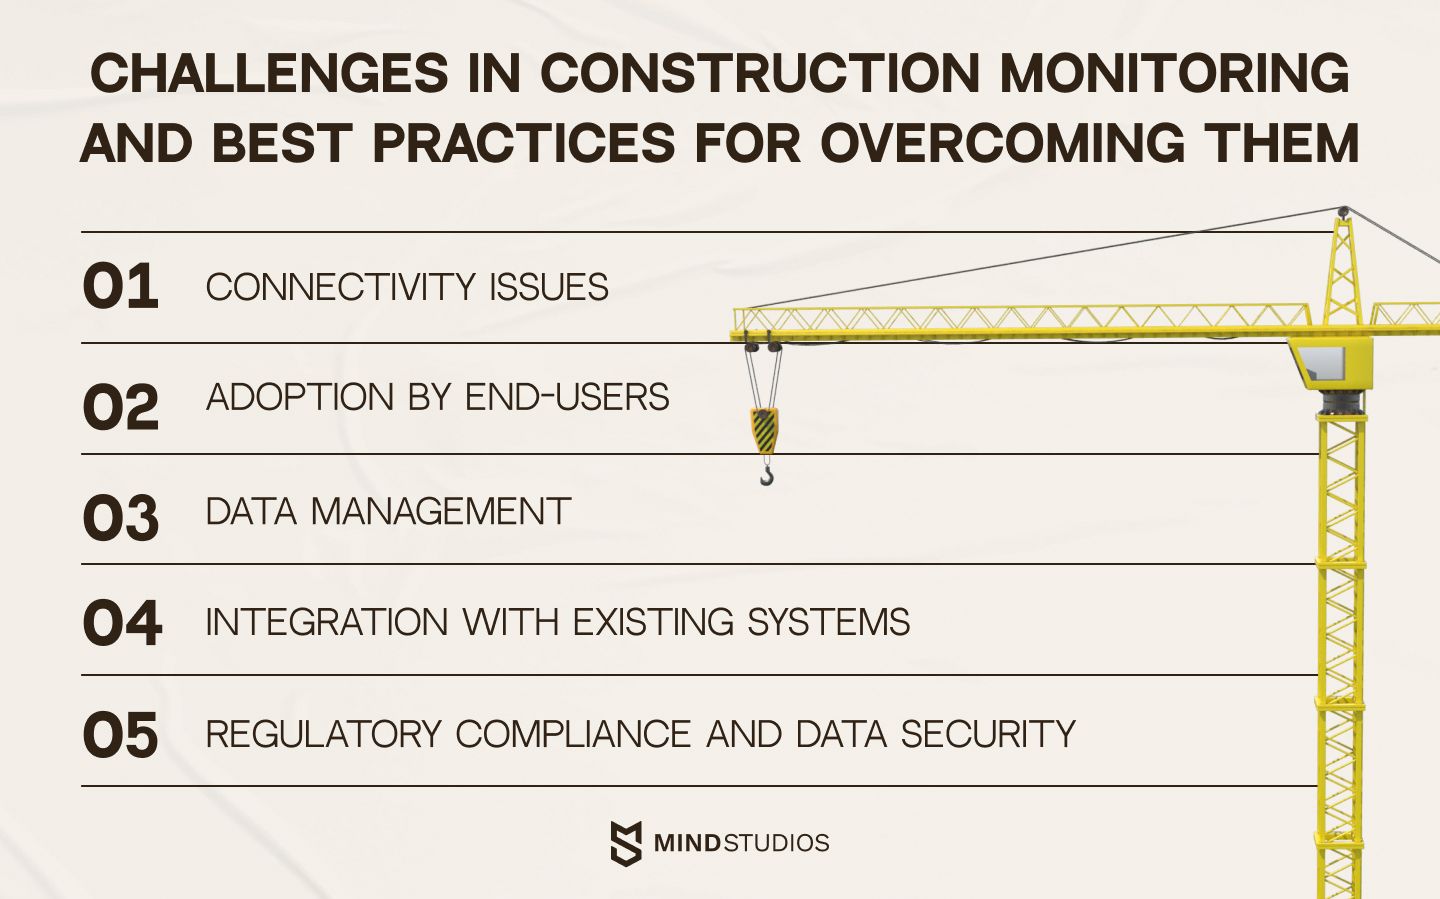 Challenges in remote construction monitoring